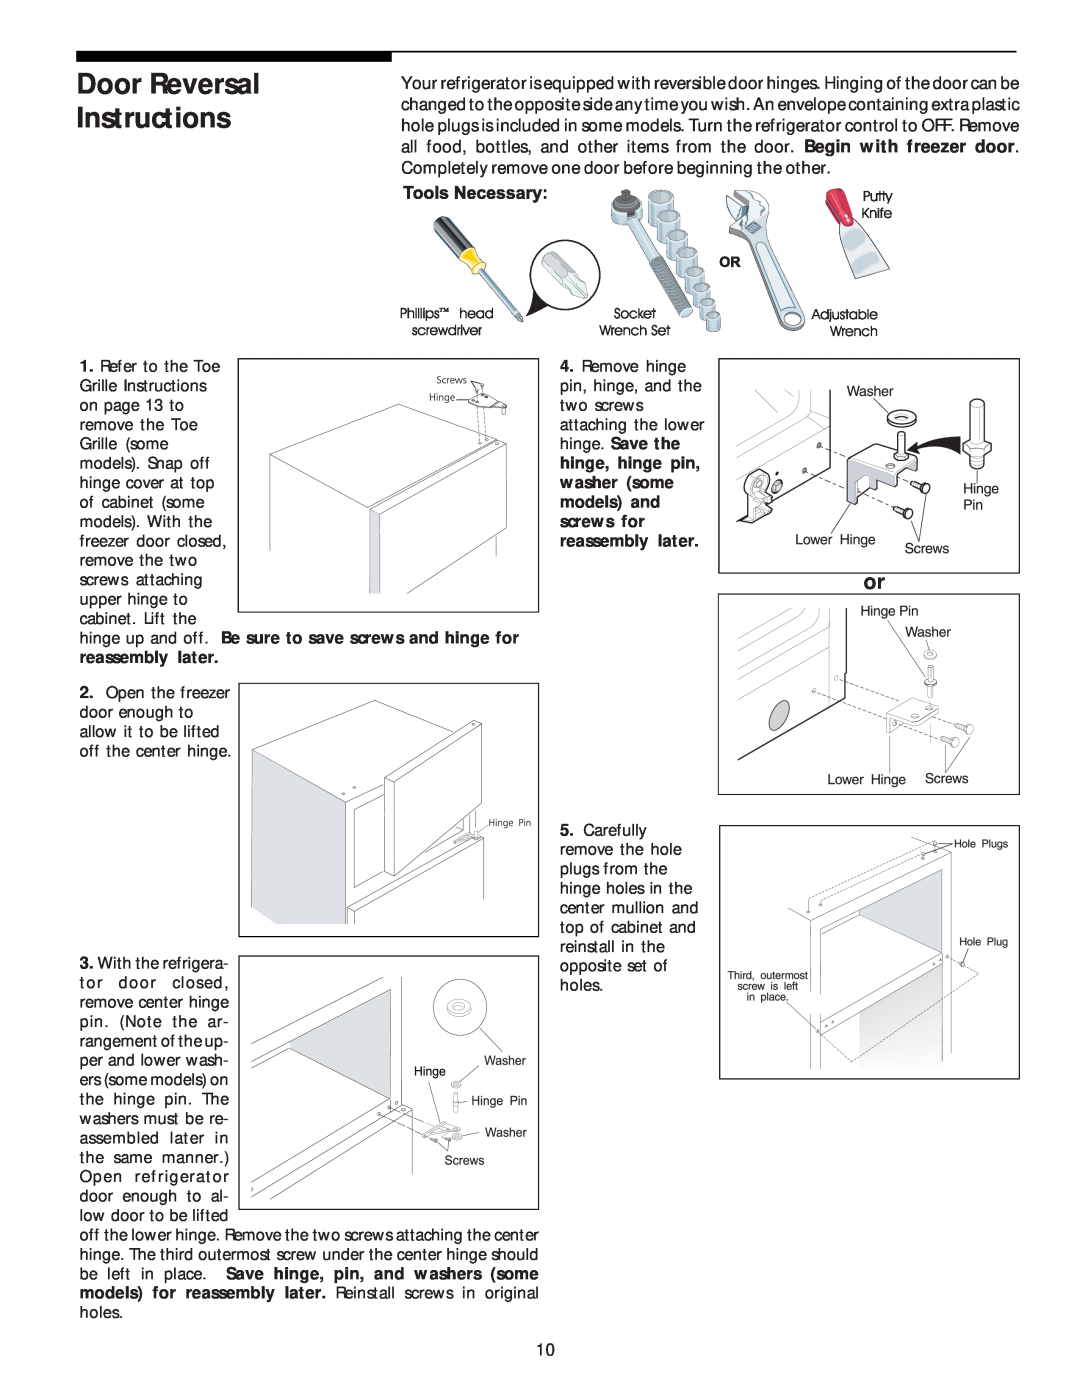 Electrolux - Gibson Top Freezer Frost Clear Refrigerator Door Reversal Instructions, hinge. Save the, hinge, hinge pin 